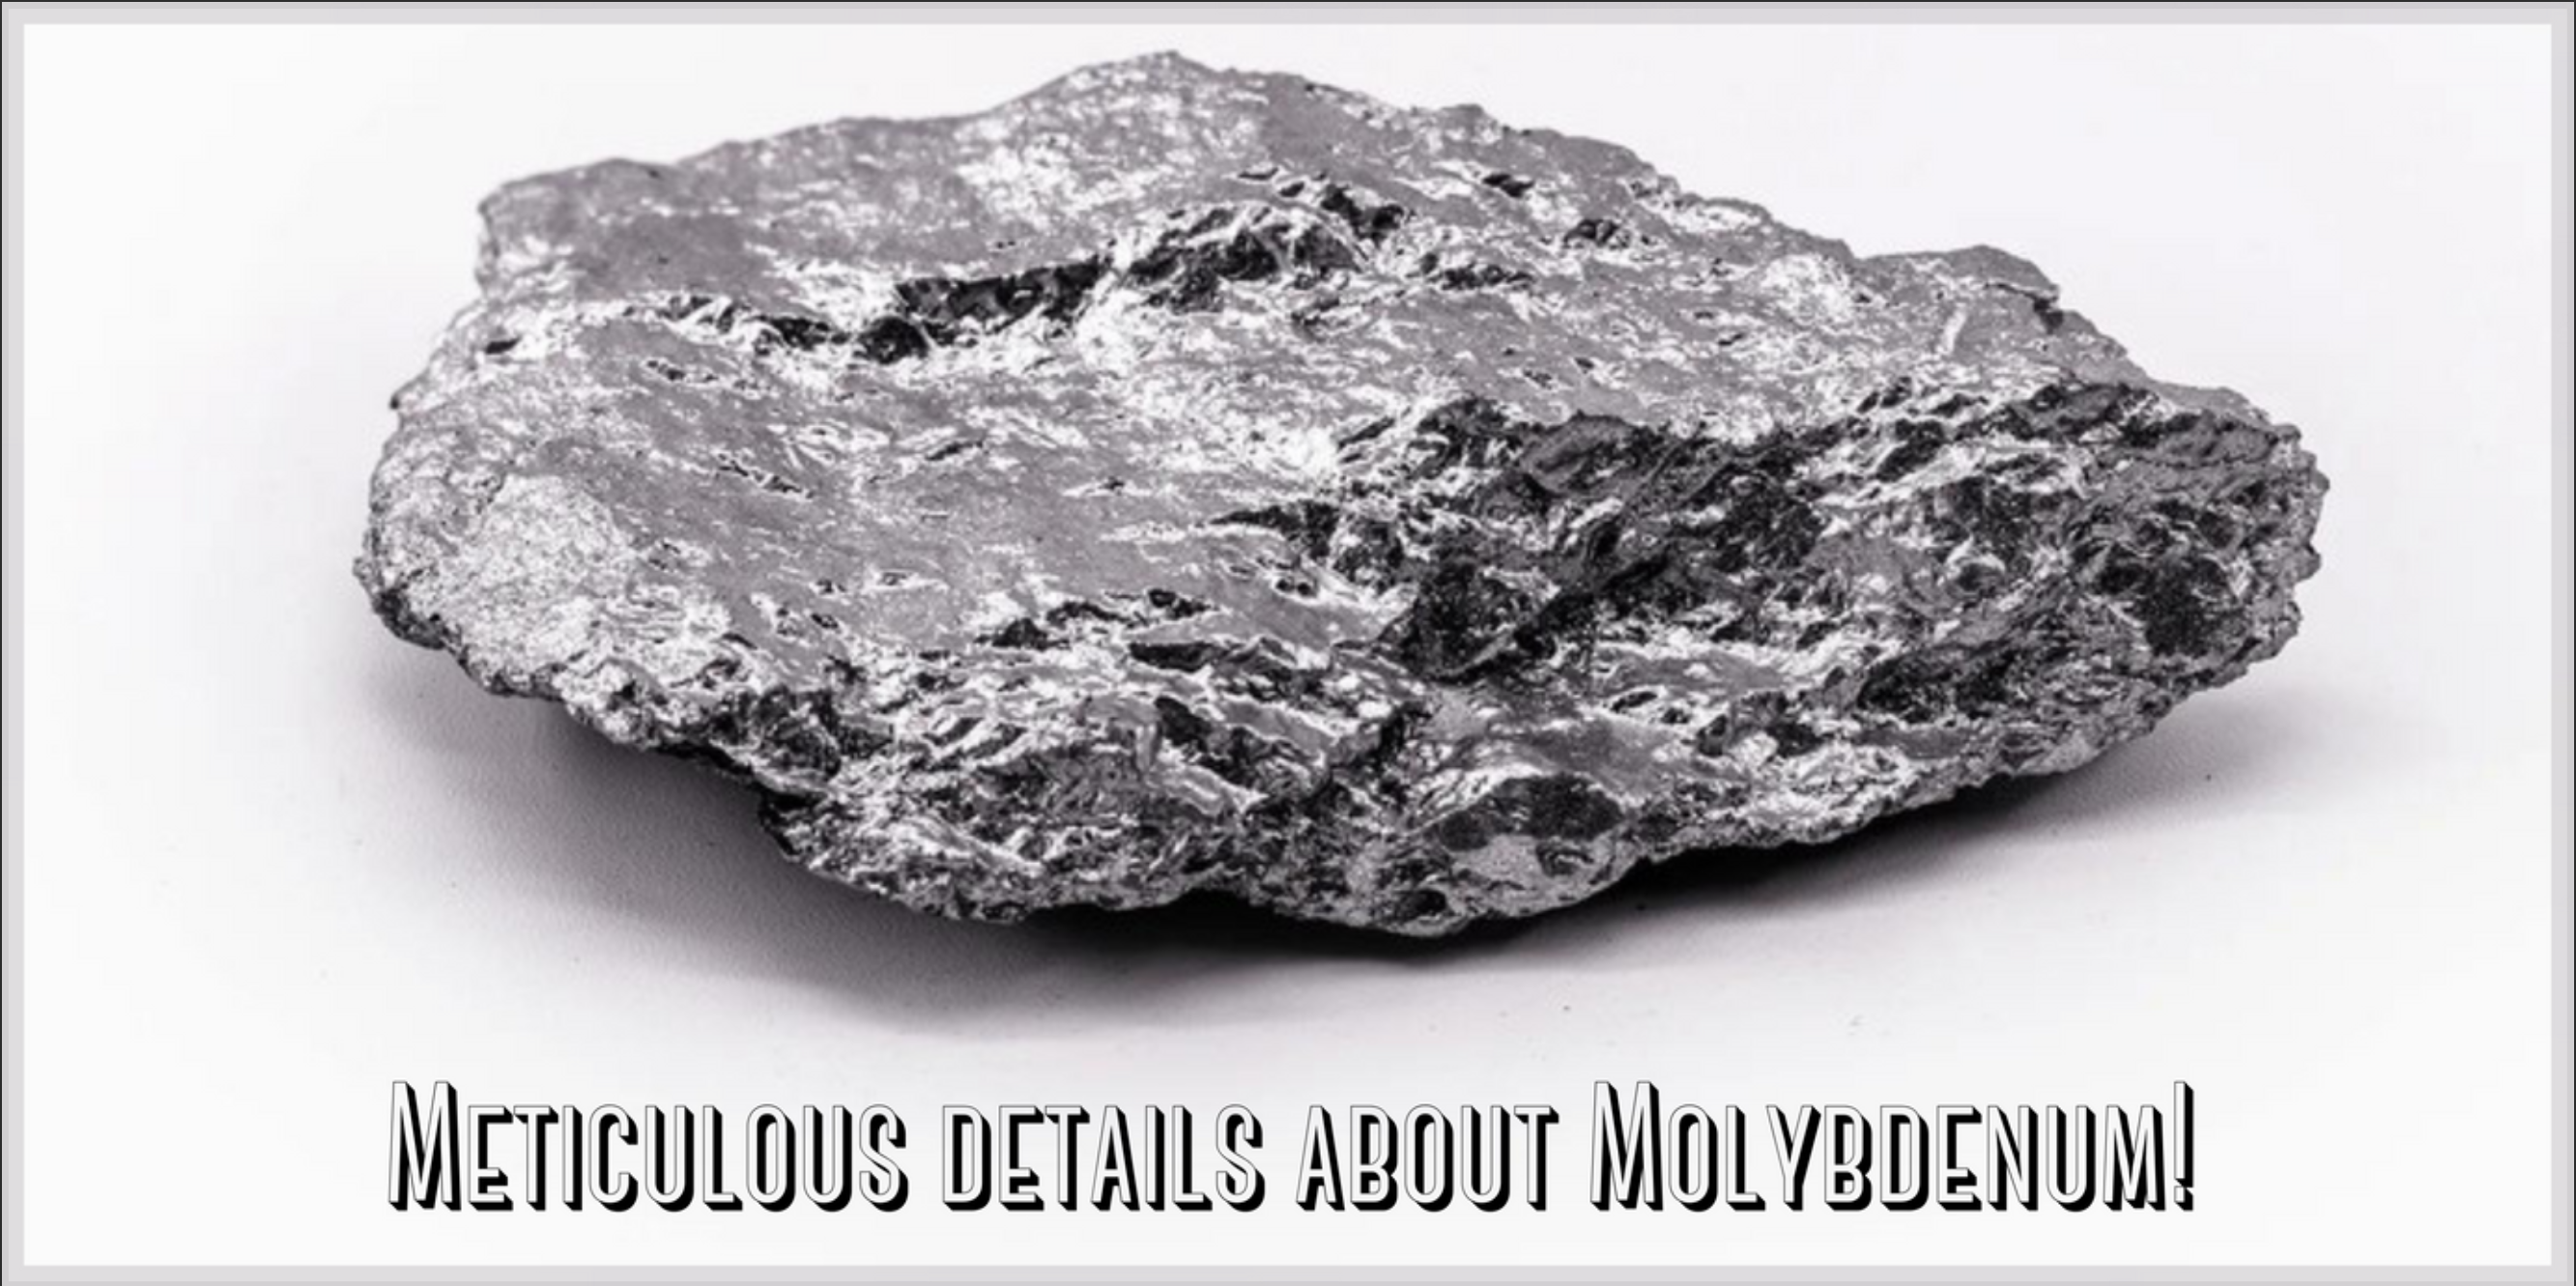 Meticulous details about Molybdenum!